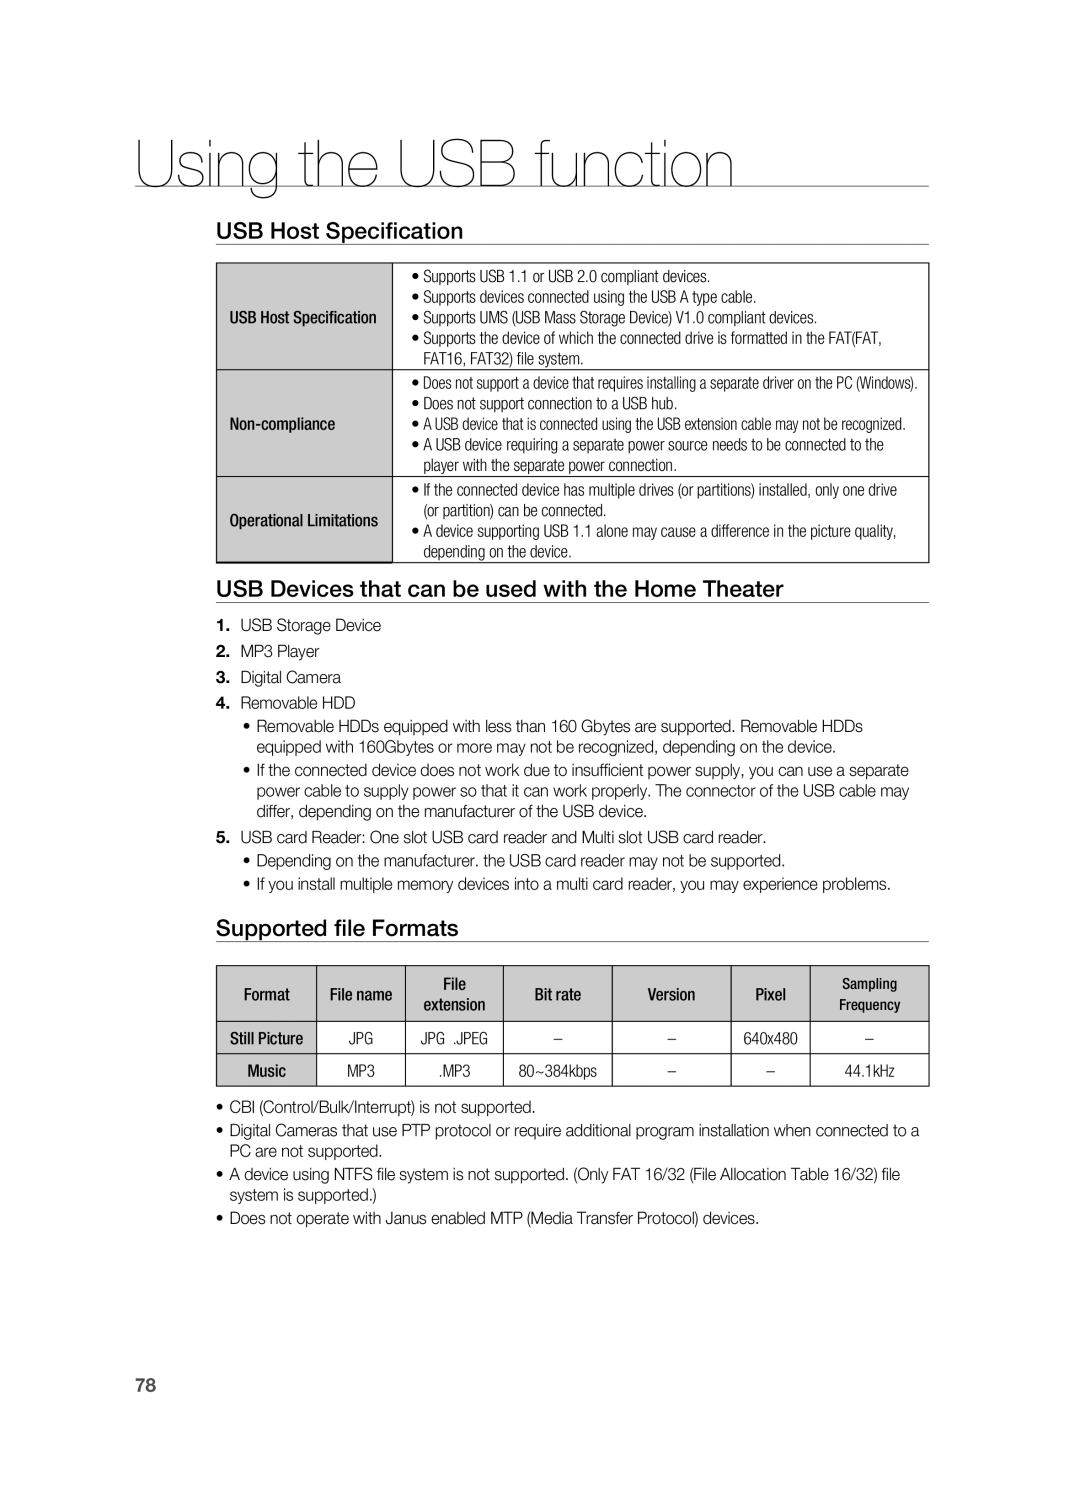 Samsung AH68-02178Z USB Host Speciﬁcation, USB Devices that can be used with the Home Theater, Supported ﬁle Formats 